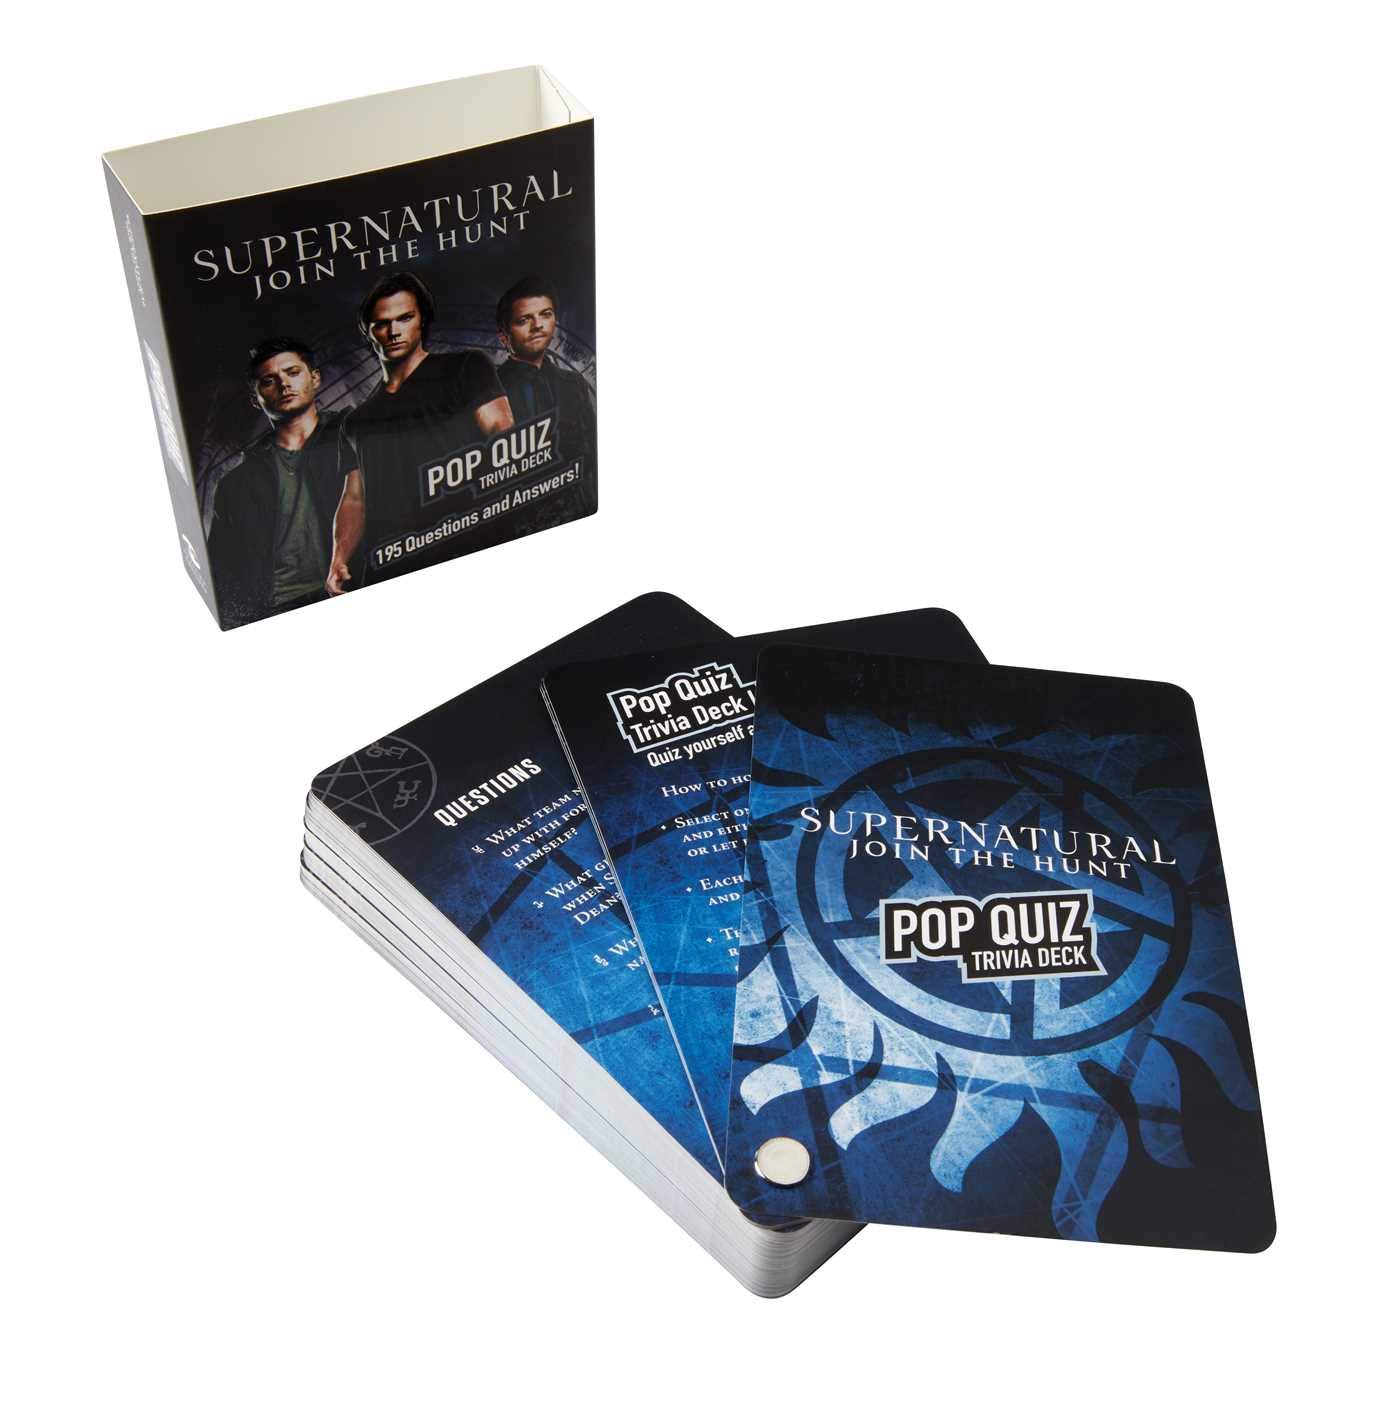 A black and blue deck of trivia cards. The background of each card depicts the anti-possession symbol in light blue, with supernatural travia questions and answers in white text. Next to the deck is a paper holder, with banner with images of Sam and Dean Winchester and Castiel on the bottom. At the top is white text saying "Supernatural: join the hunt."